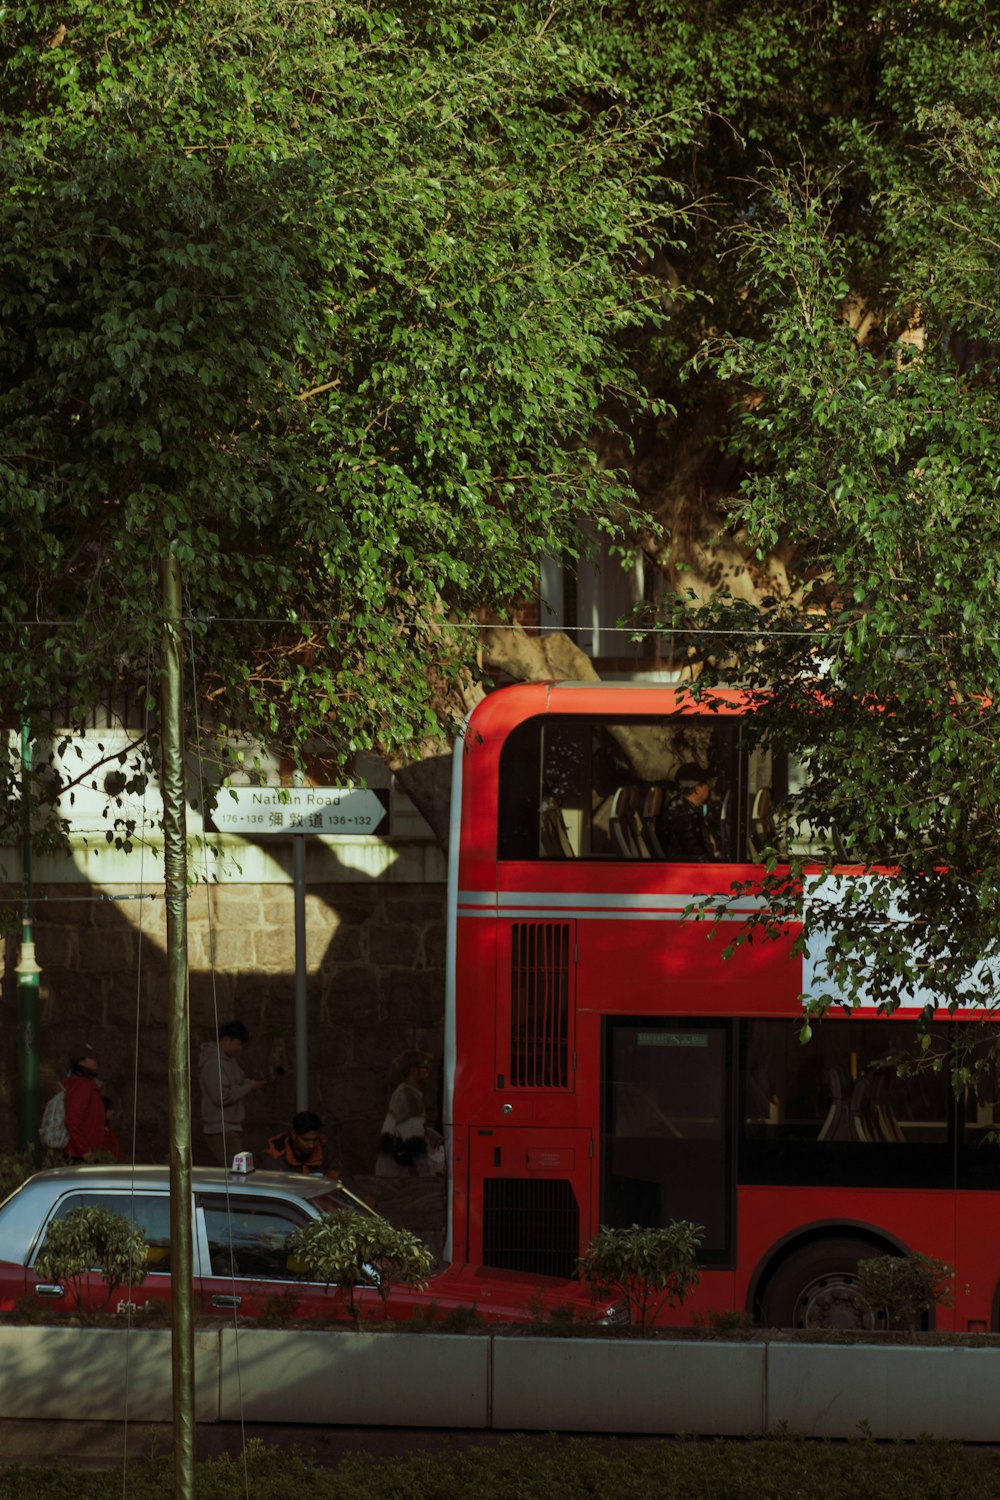 a red double decker bus parked next to a tree